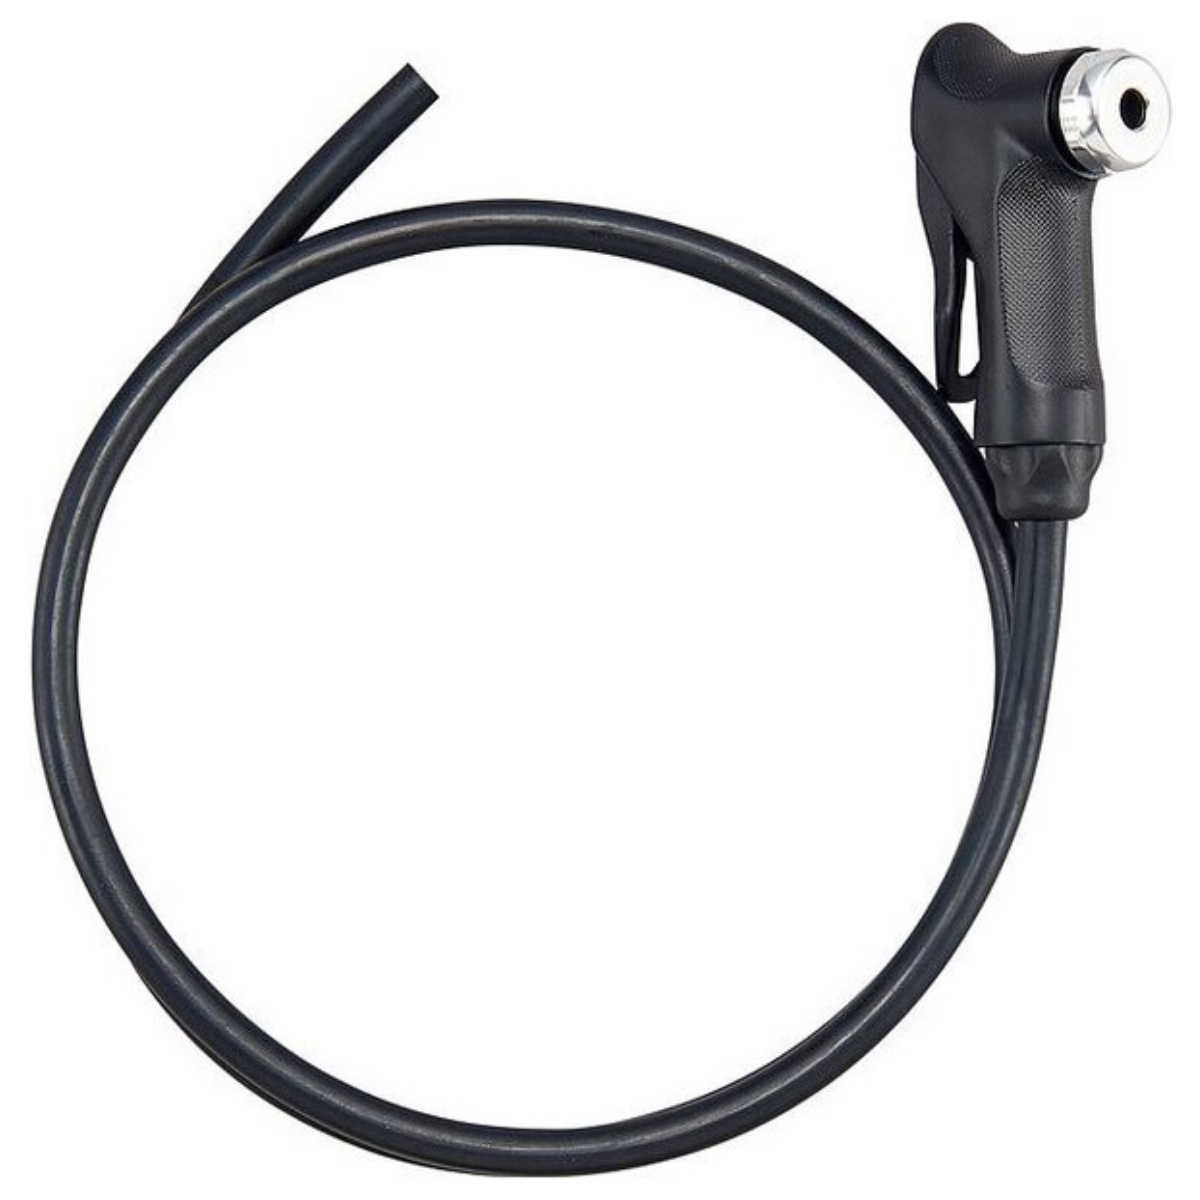 Specialized Replacement Head & Hose